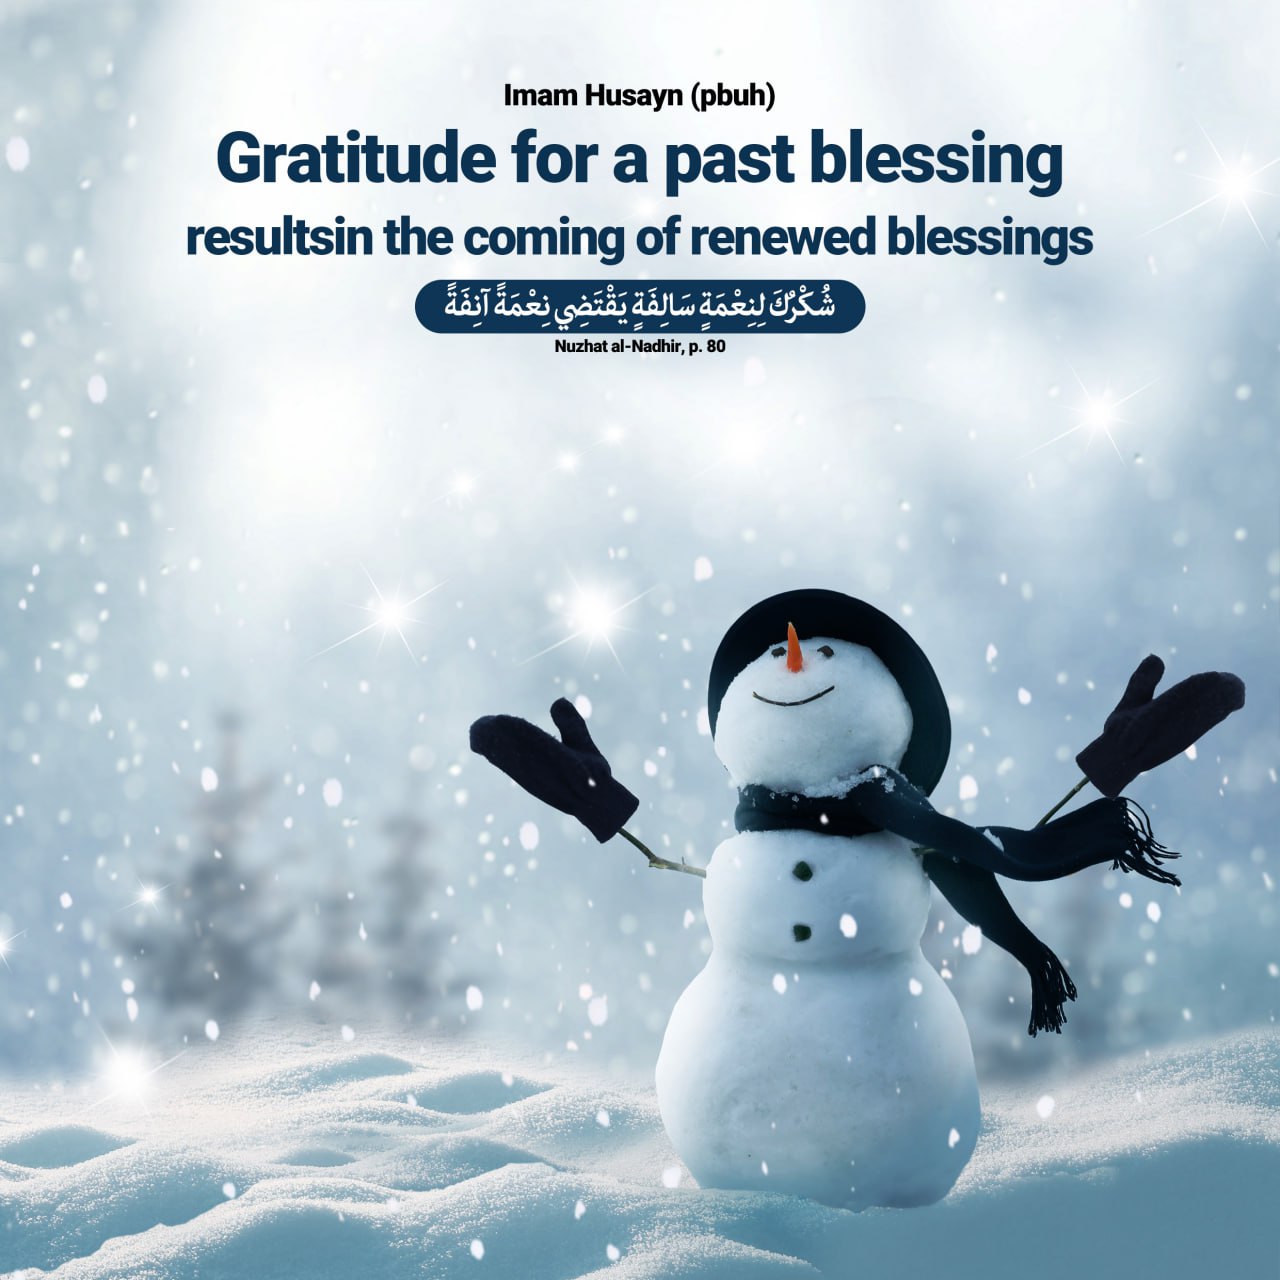 Imam Hussein (p.b.u.h) : Gratitude for a past blessing resultsin the coming of renewed blessings